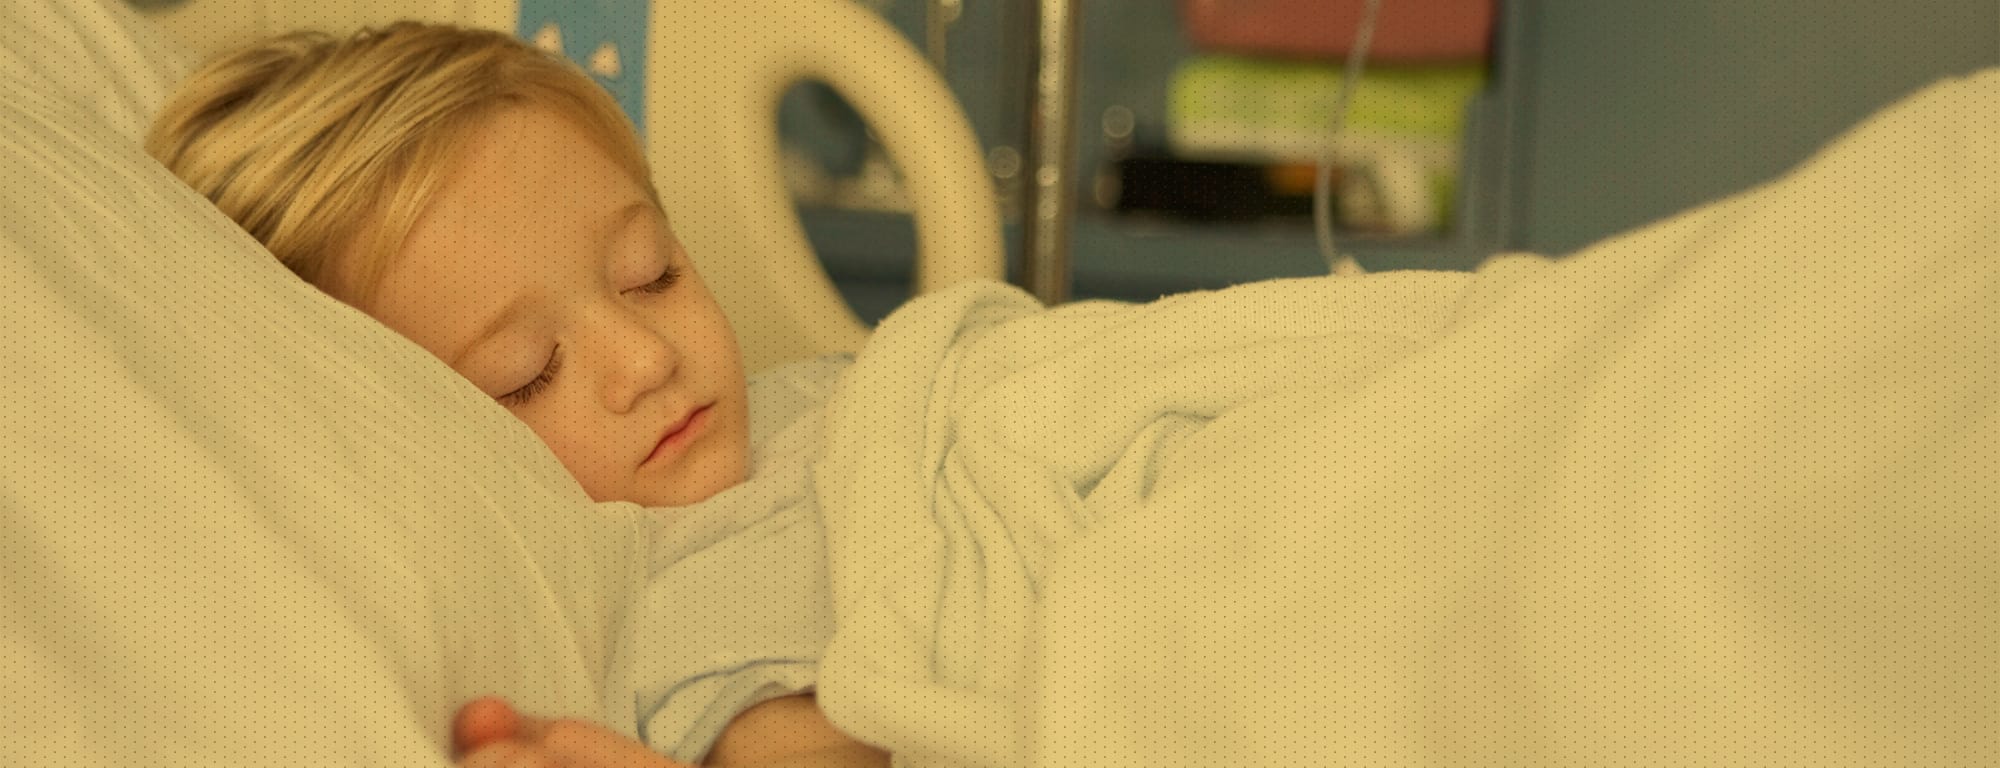 Young girl resting in hospital bed